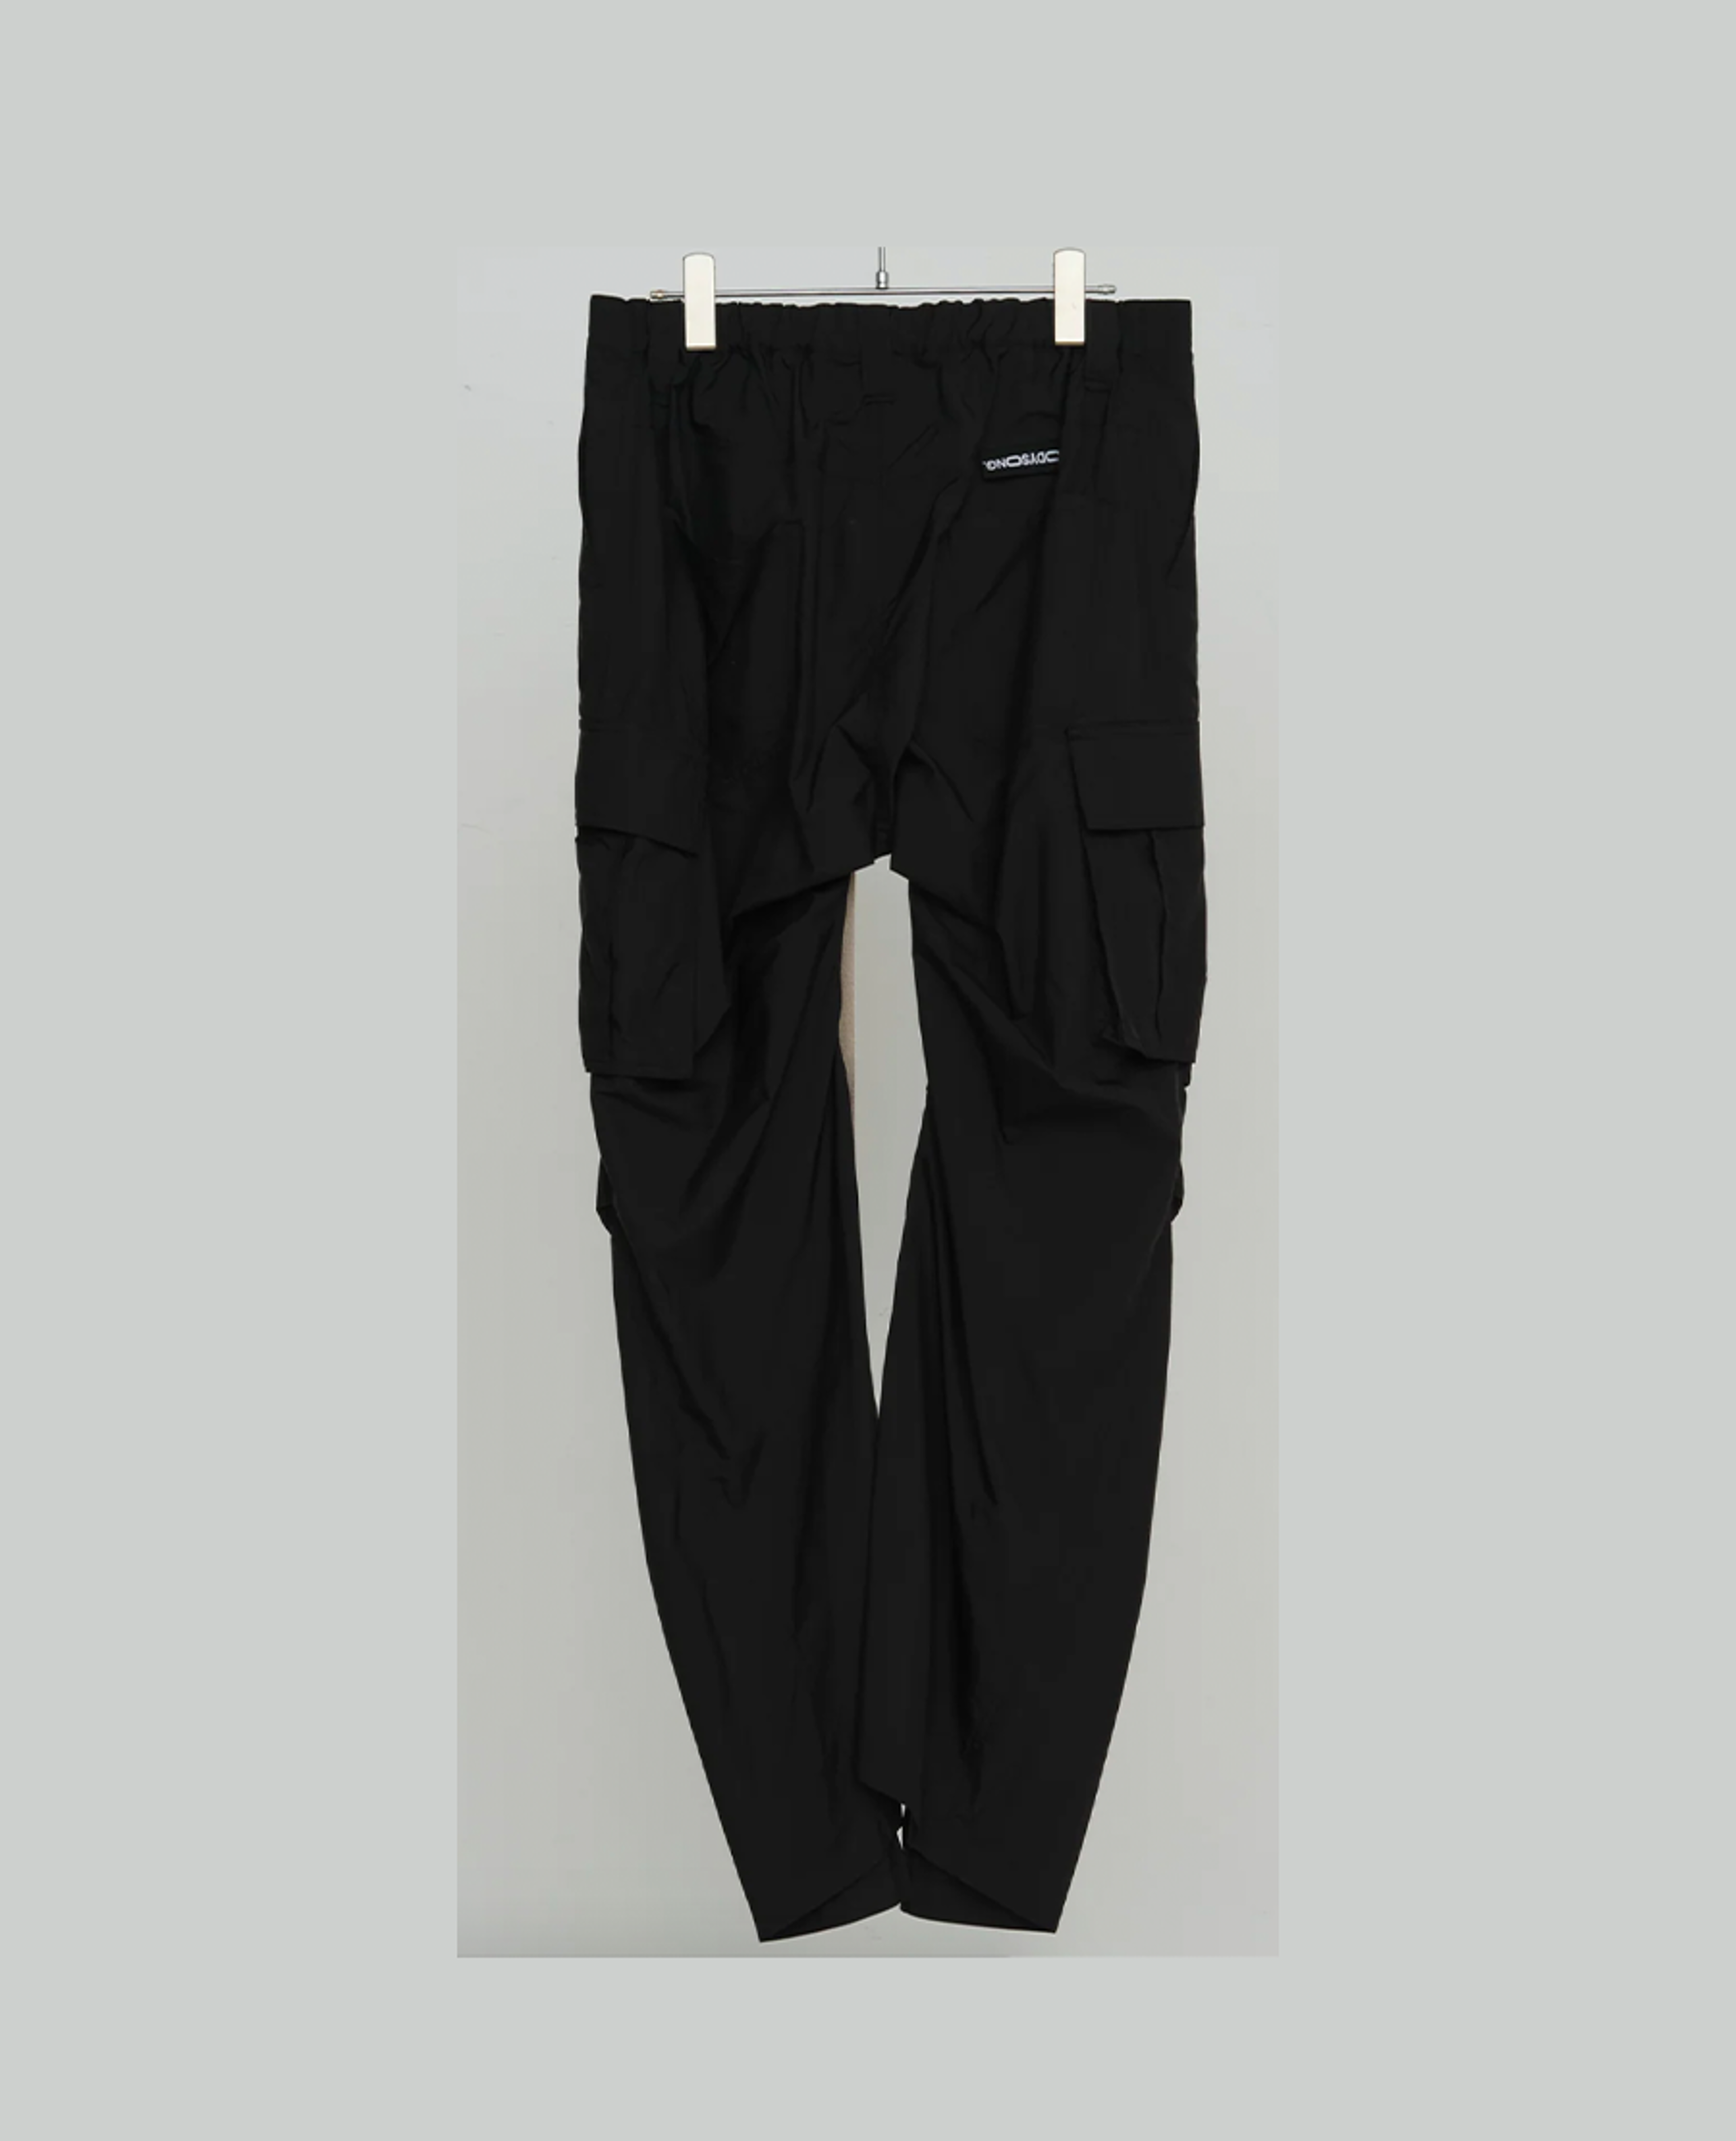 NTWRK - Bodysong Twisted Limonta Trousers